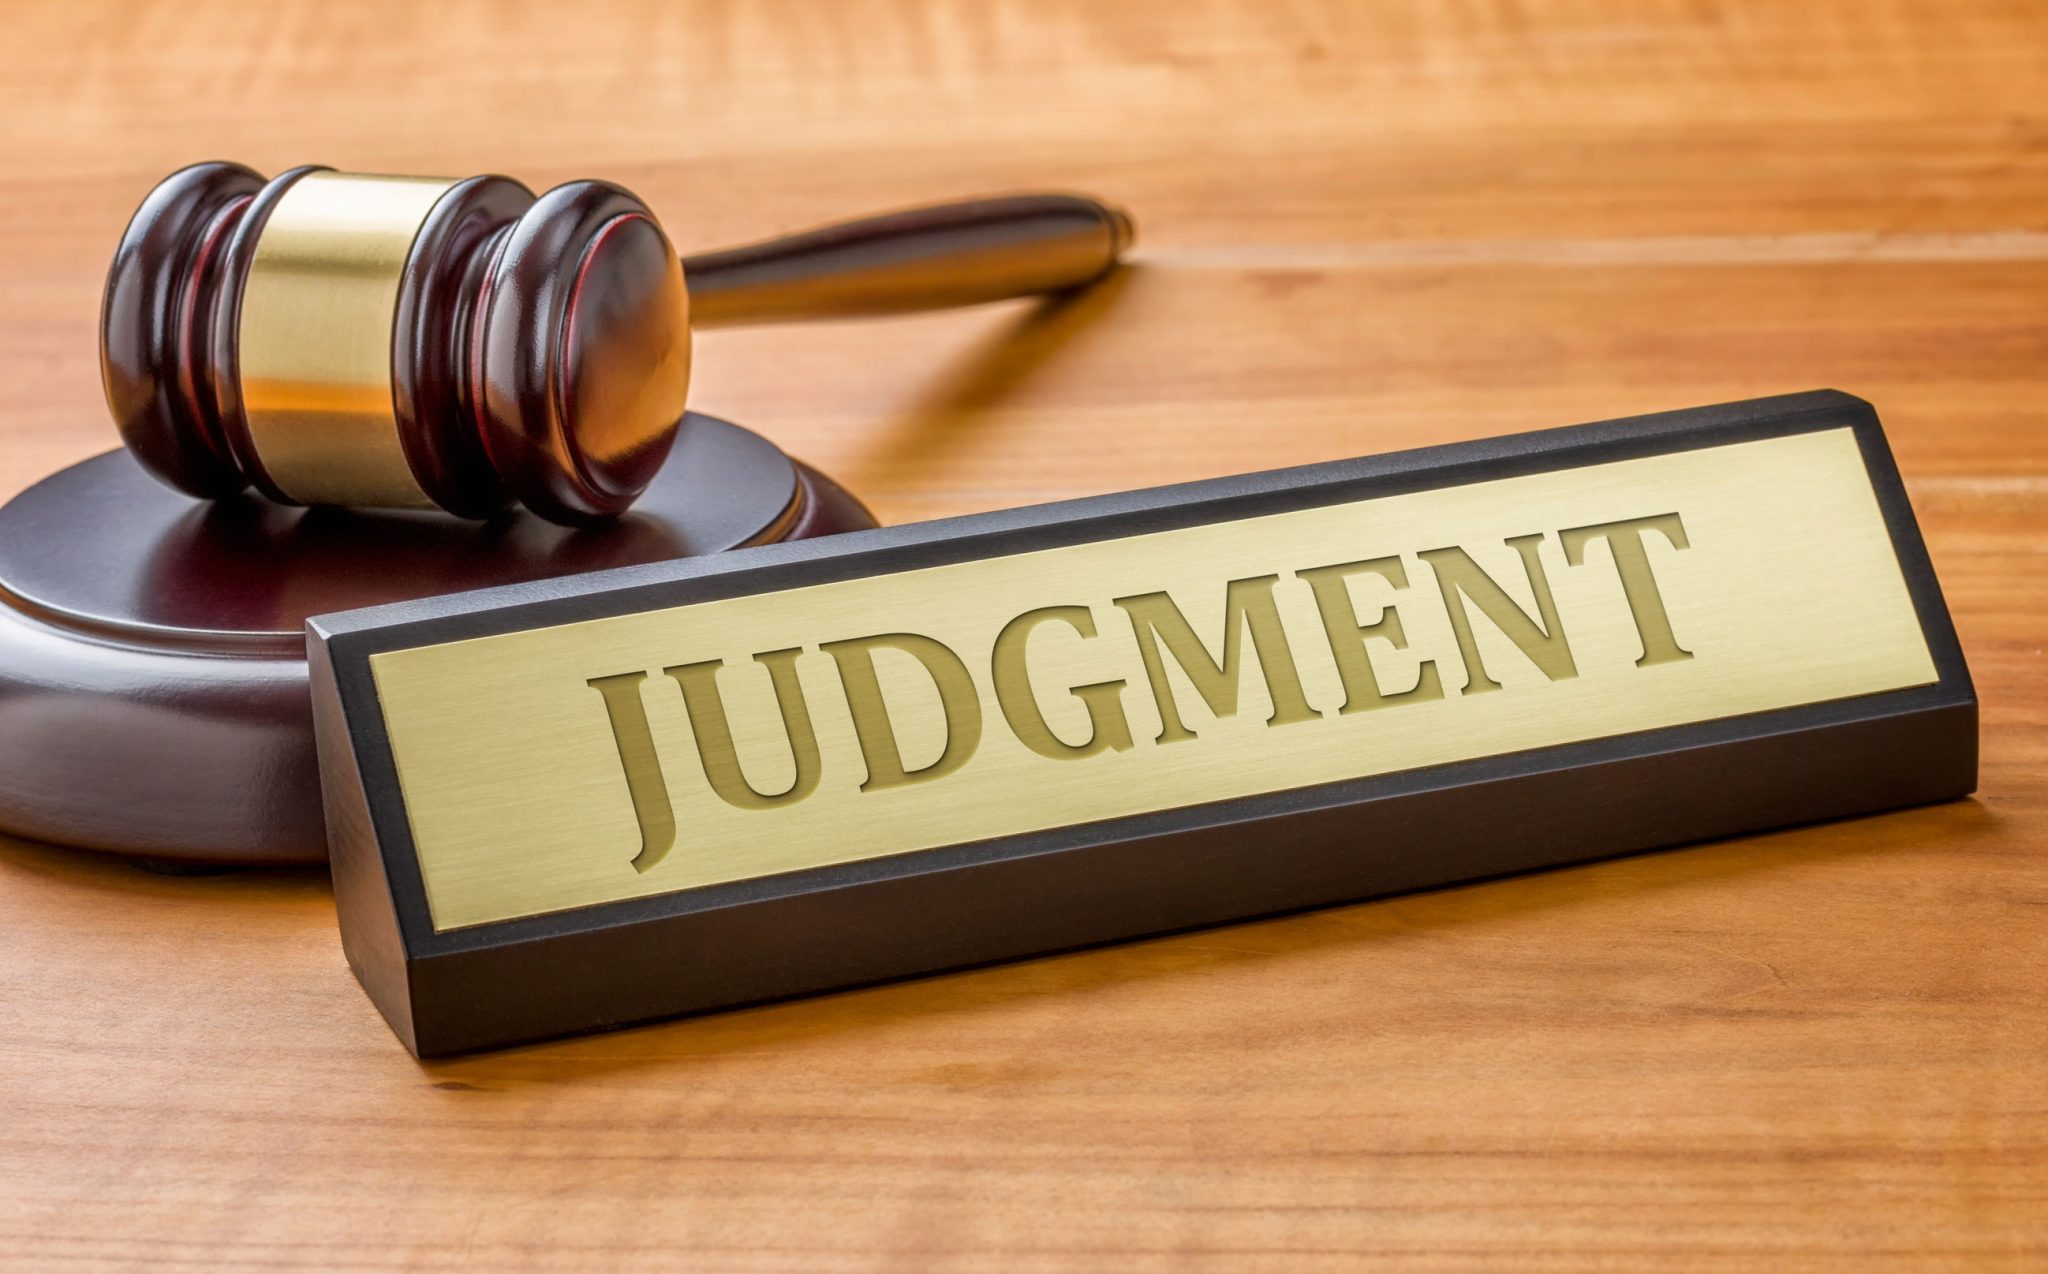 How to read a long Judgement Smartly - CareerGuide